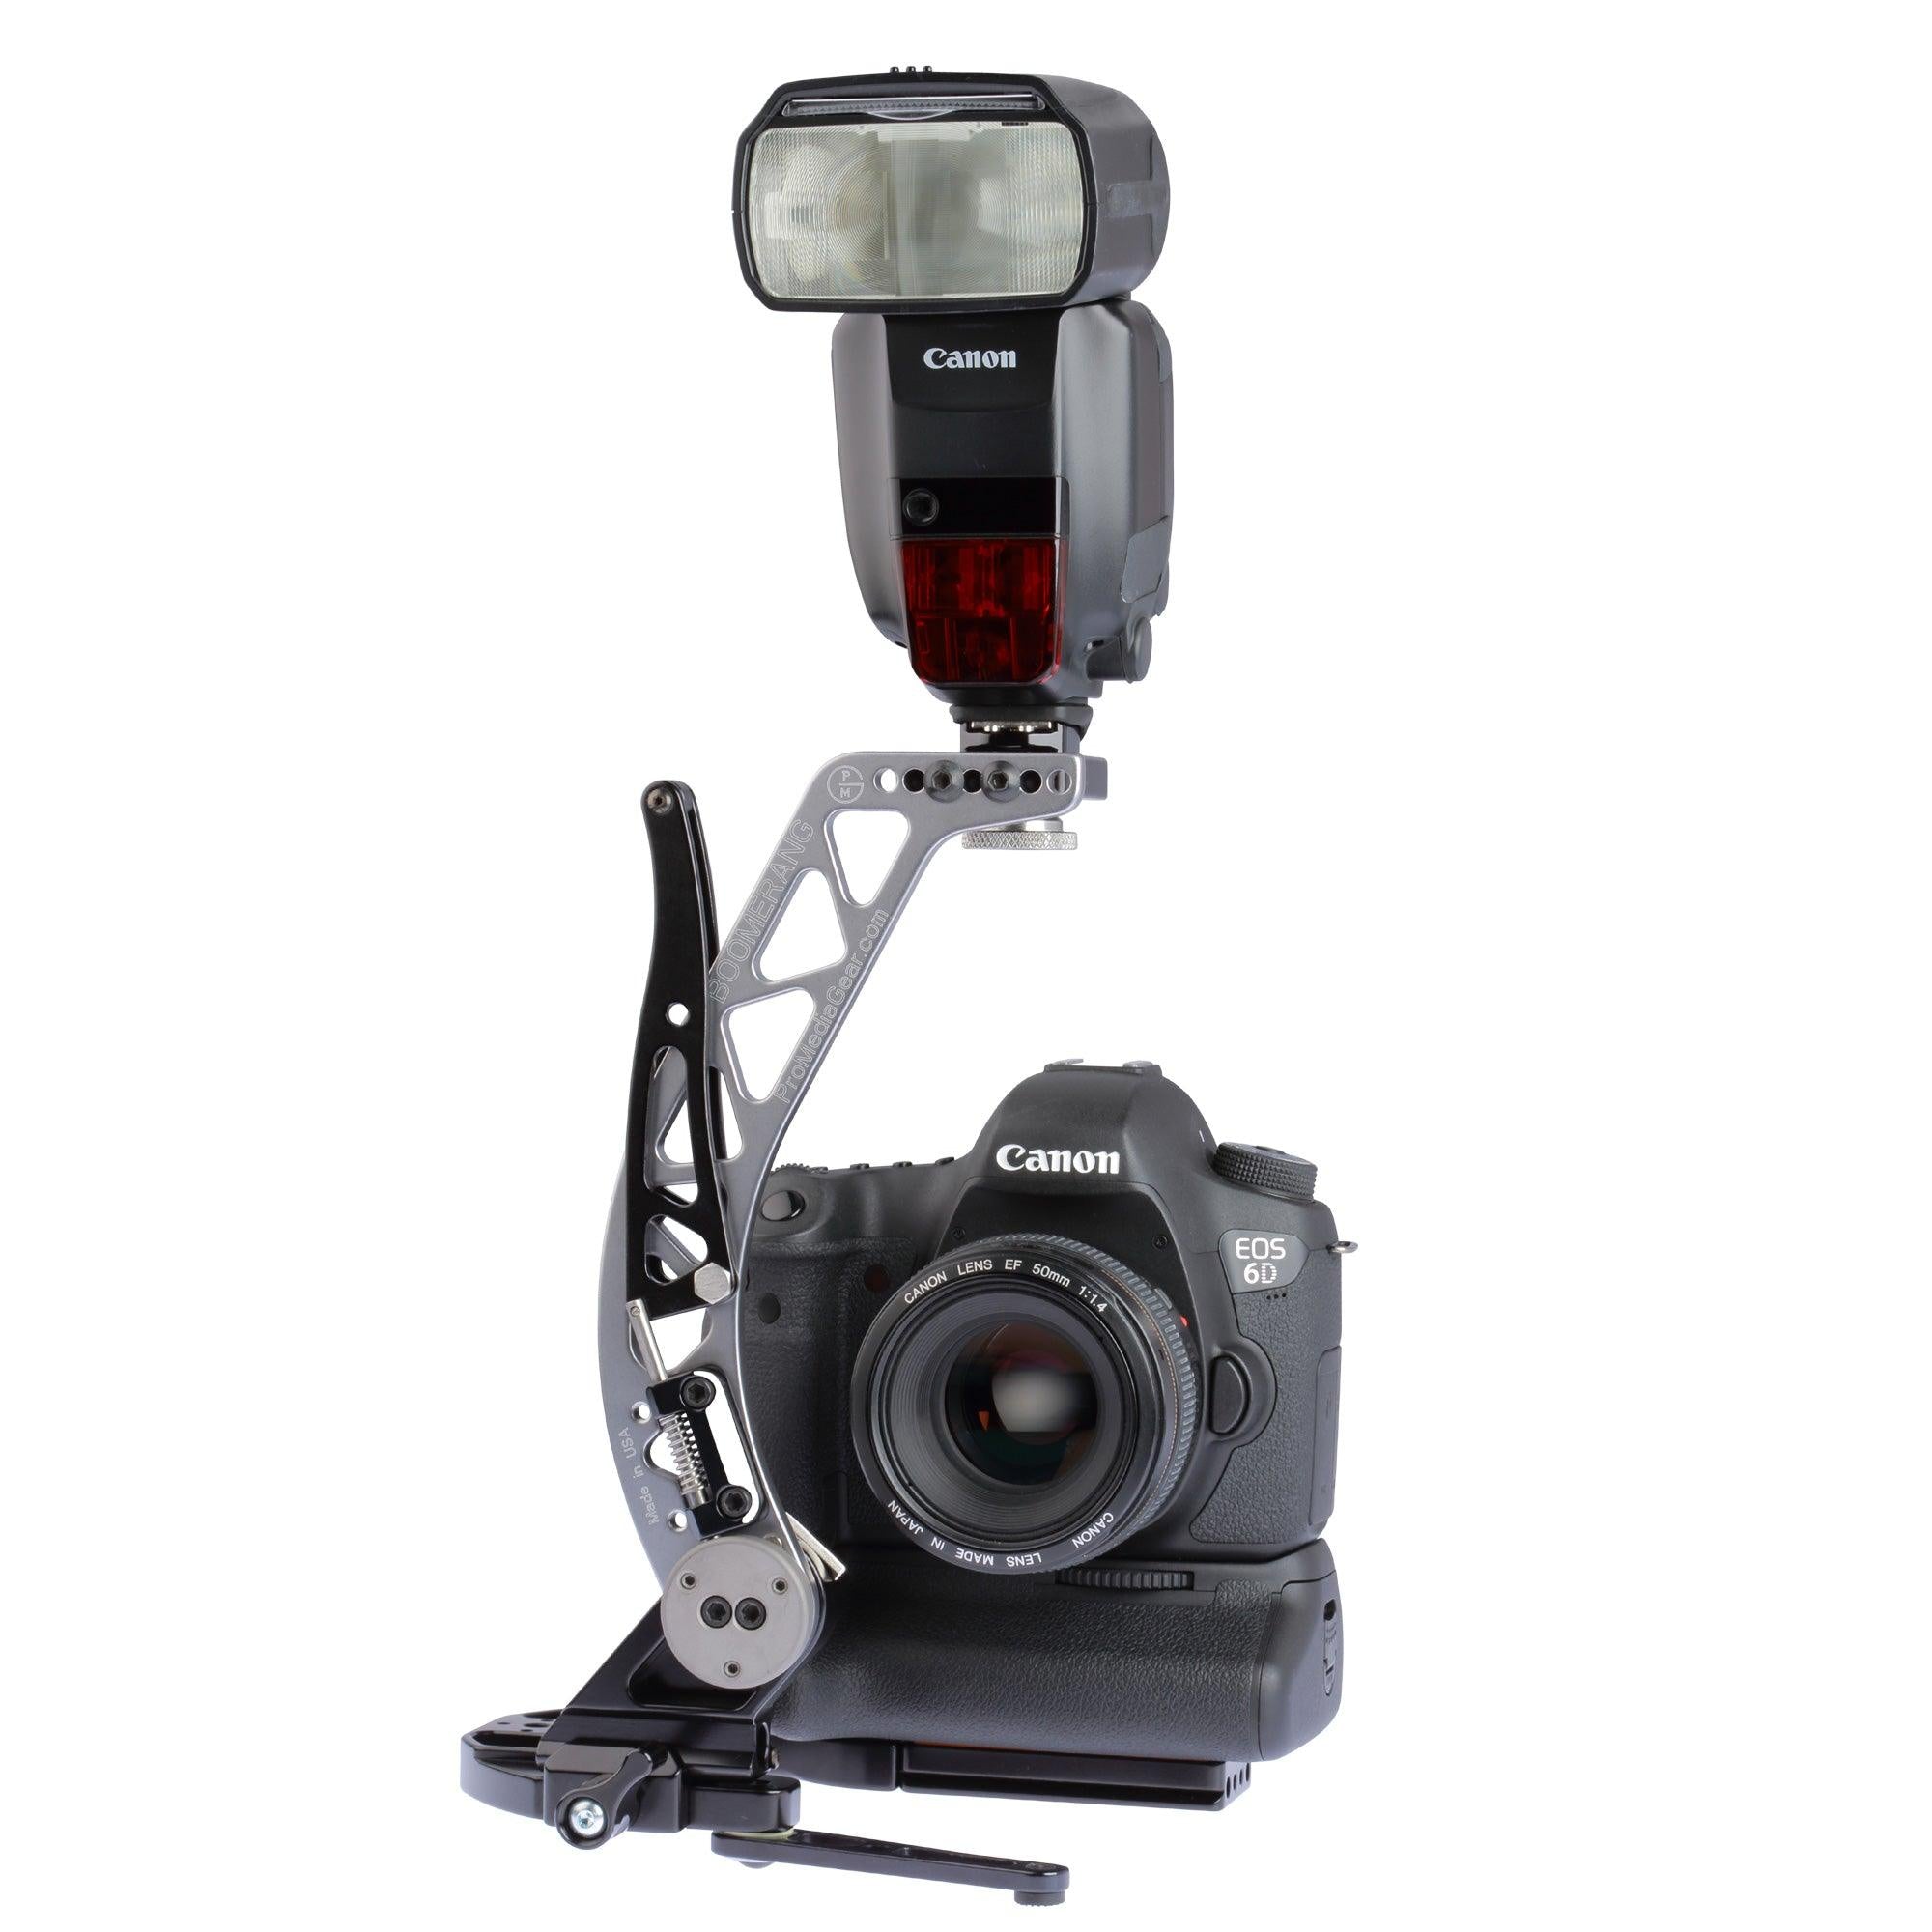 BBGv2 Boomerang Flash Bracket for Cameras with Battery Grip